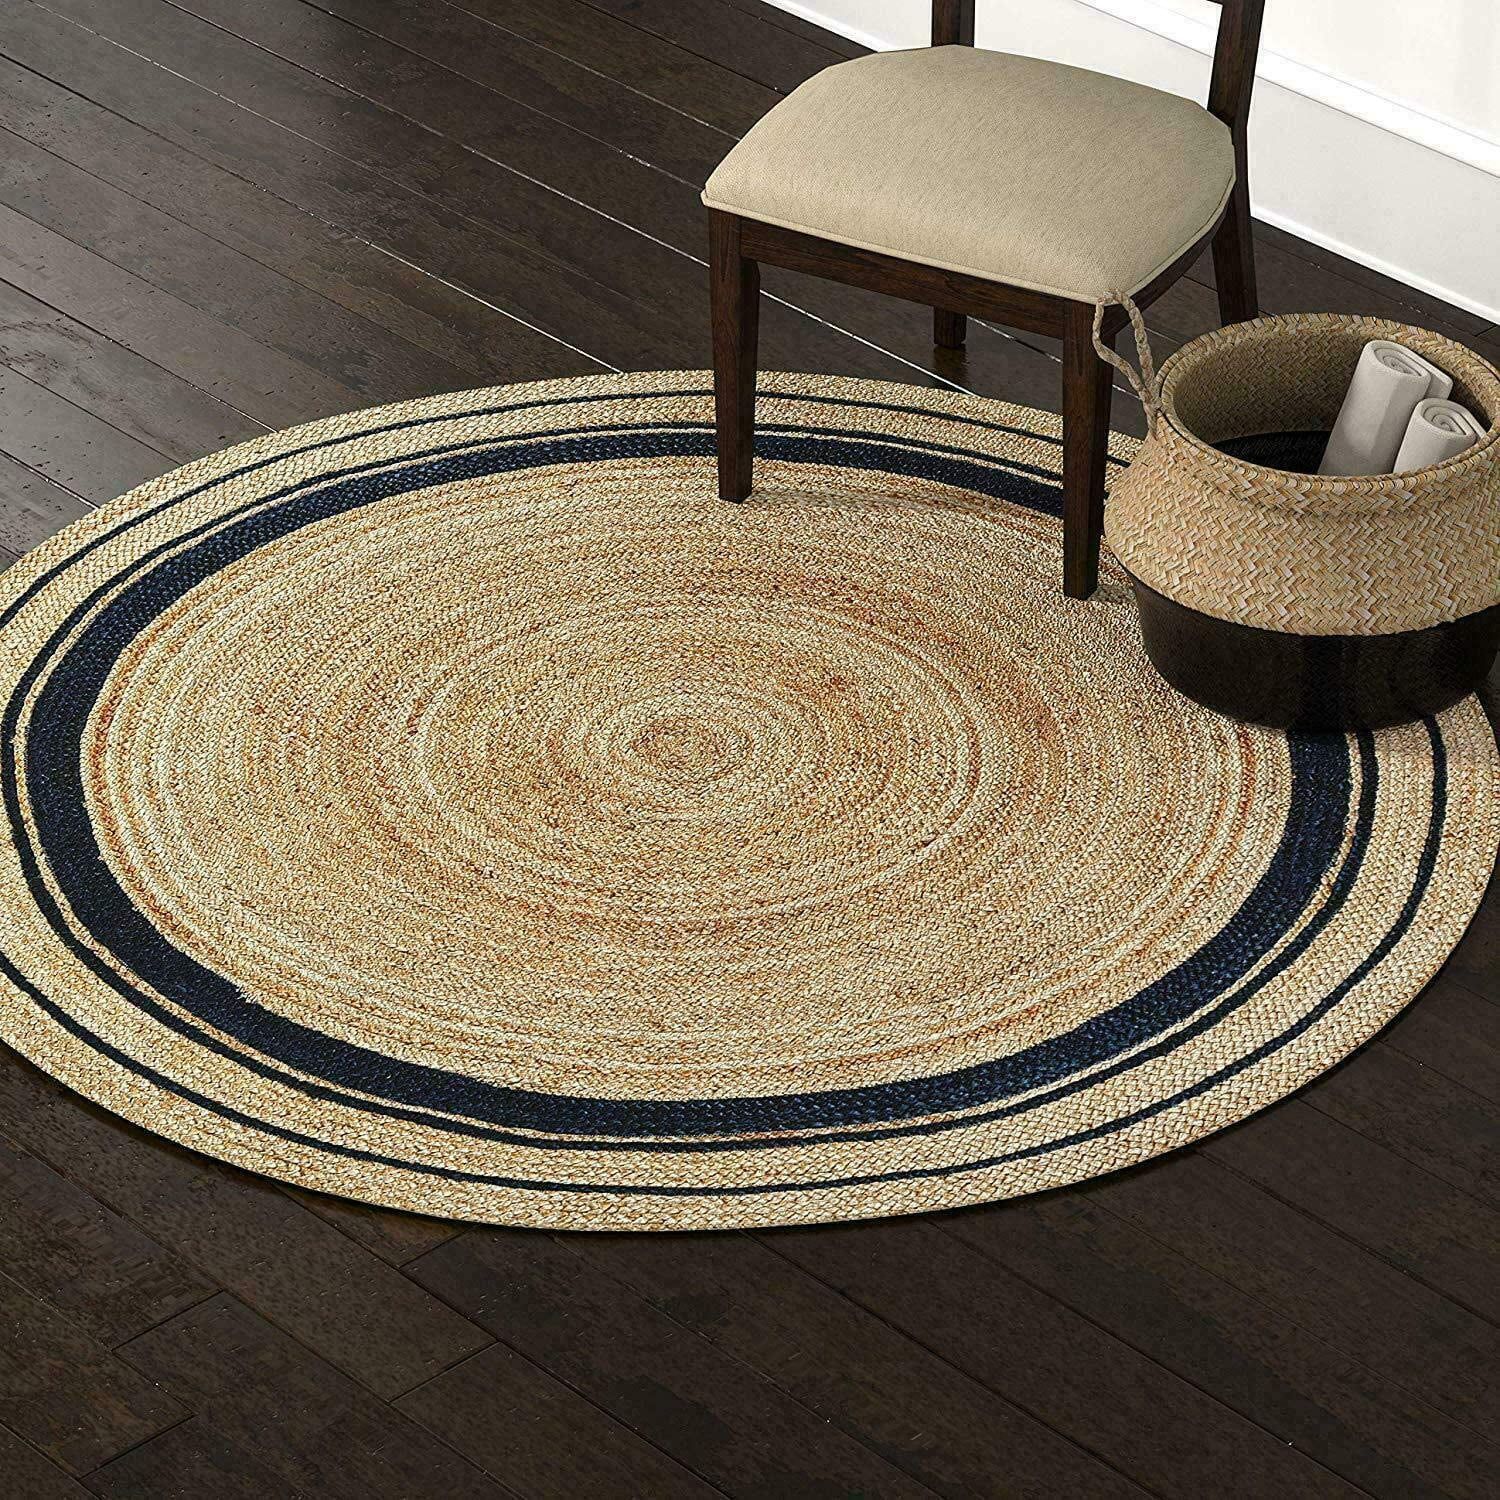 Black Border Handmade Hand Woven Boho Braided Jute Area Rug Natural Fibers Round  Rugs For Living Room, Kitchen, Indoor & Outdoor Carpet  2” Feet (24 Inch) –  Walmart Pertaining To Border Round Rugs (Photo 4 of 15)